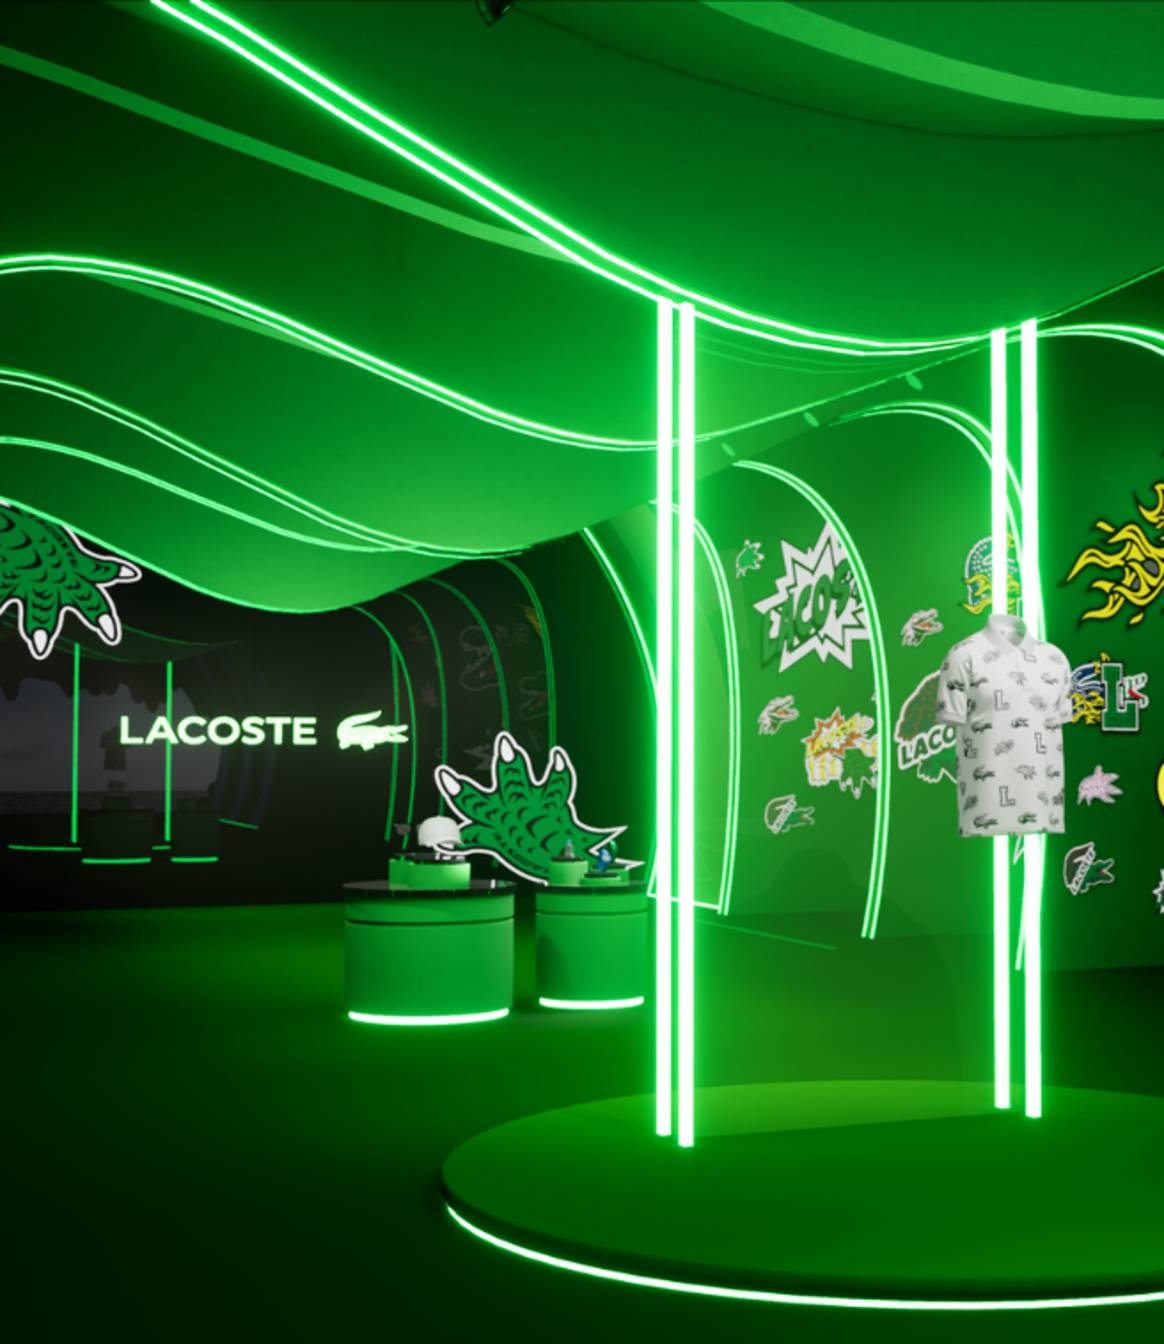 Lacoste virtual reality store by Emperia. Image: Emperia